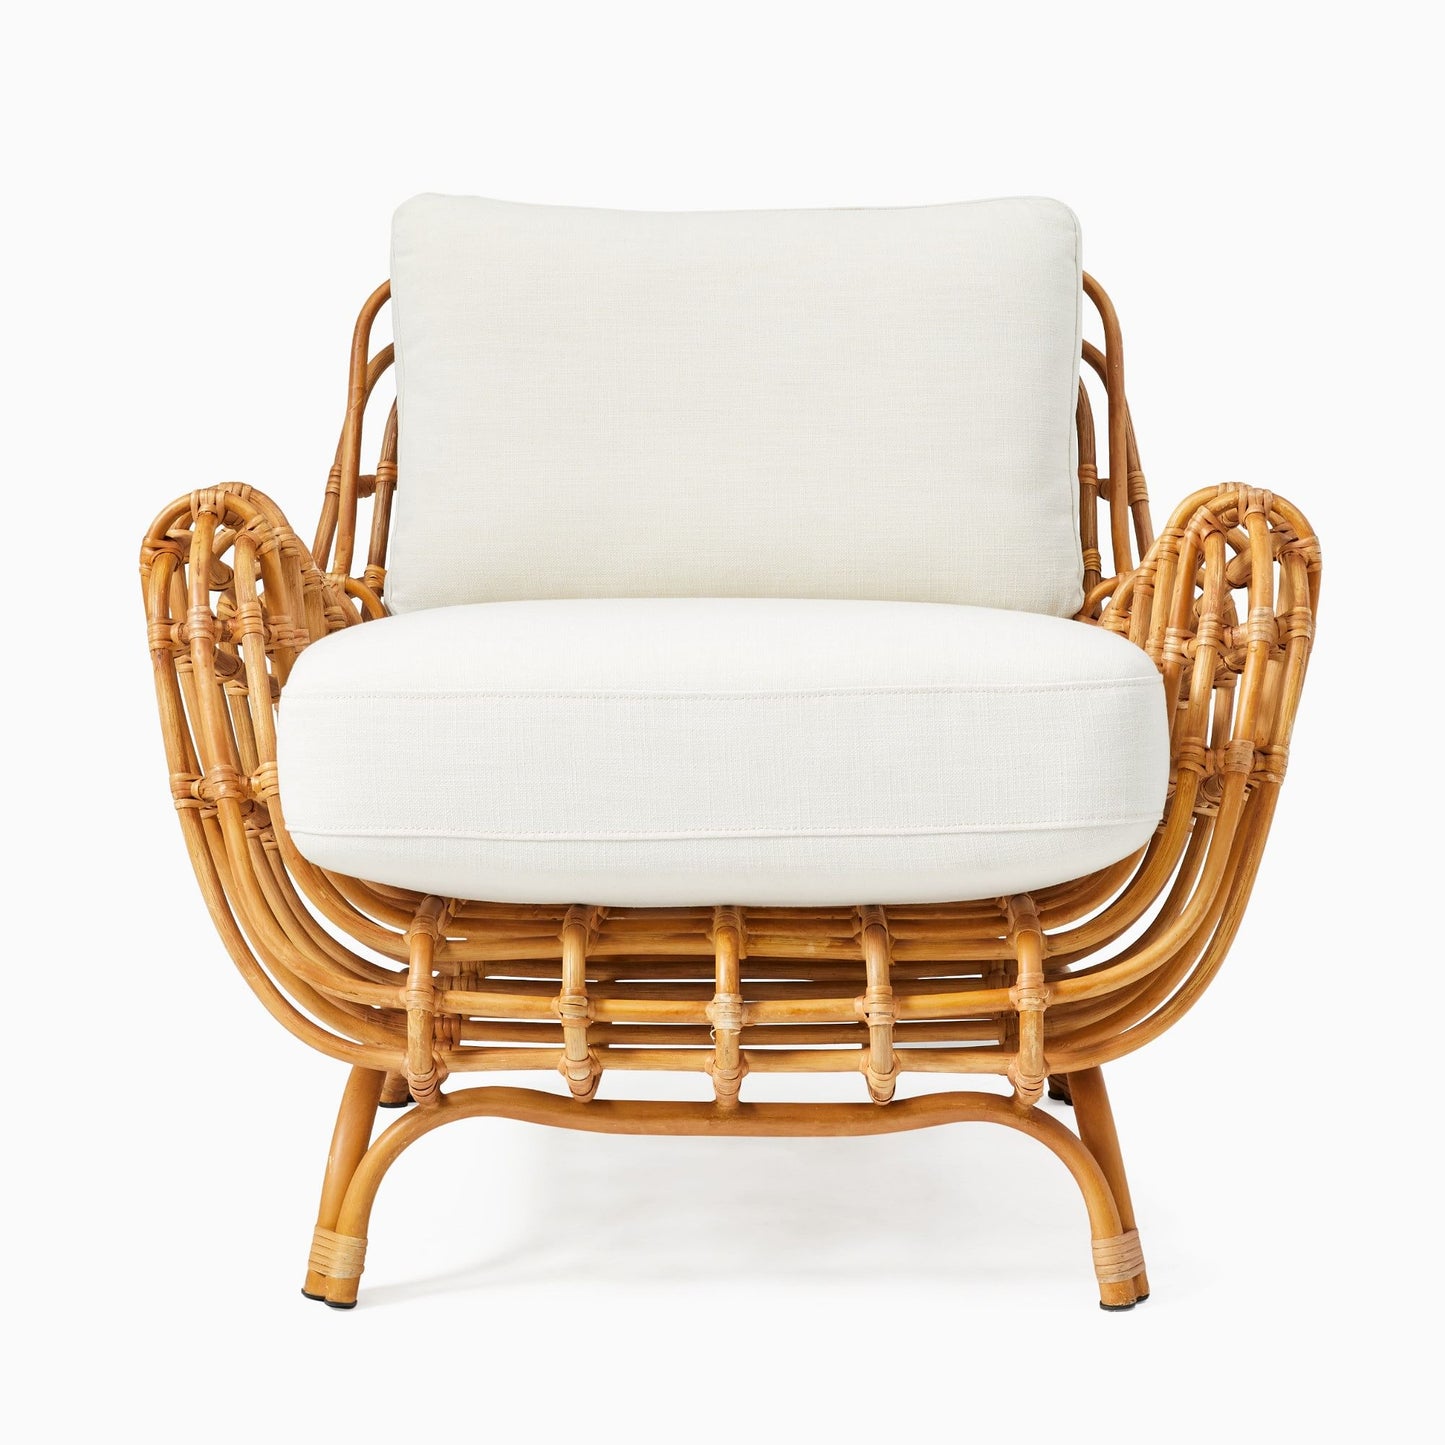 Cane chairs for Lounge | Bamboo Chairs for Living rooms- Kimaya - Akway